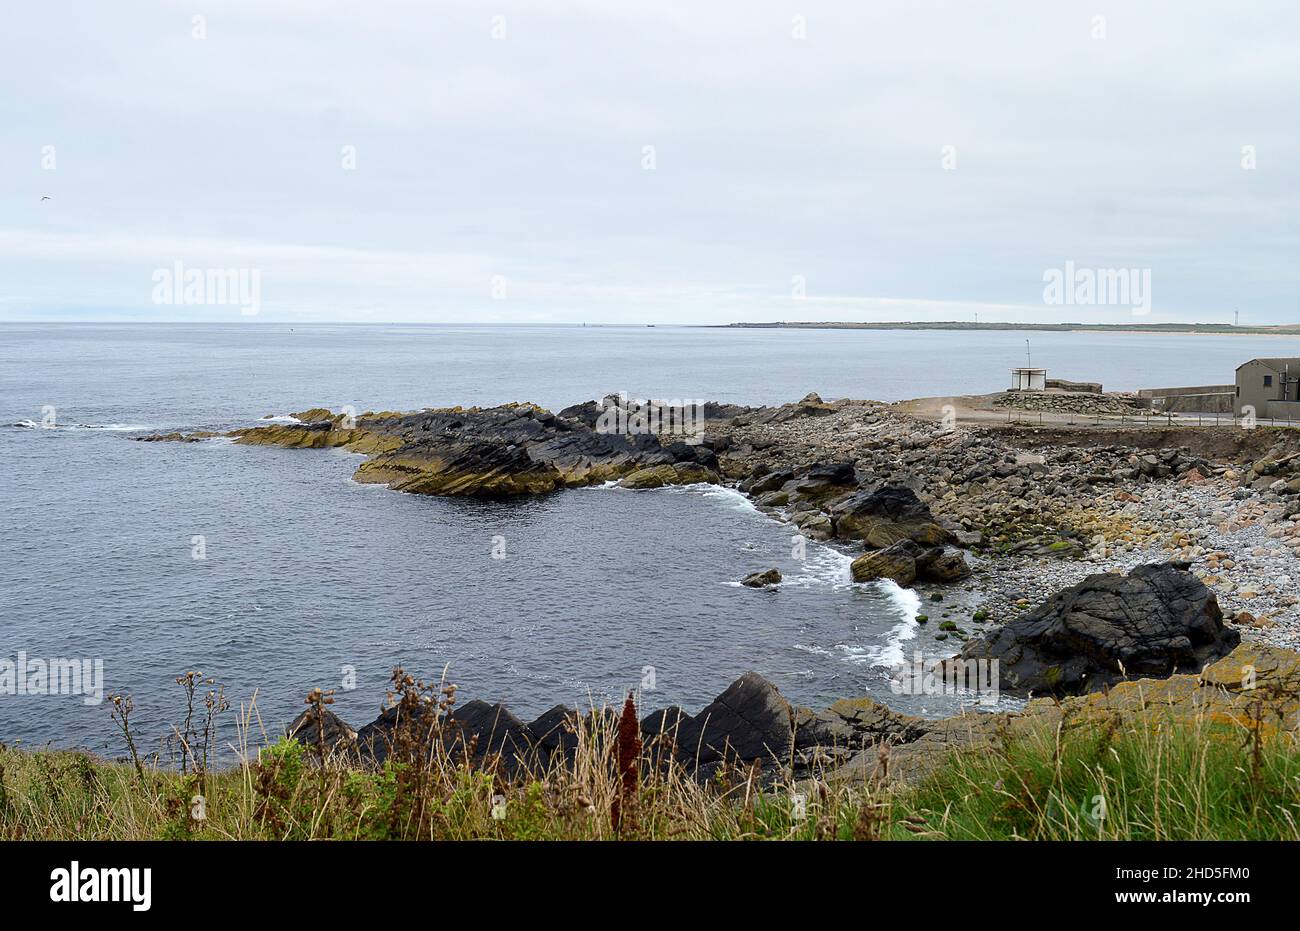 A rocky outcrop in the North Se at: Kinnaird Head, Fraserburgh, Aberdeenshire, Scotland. Stock Photo